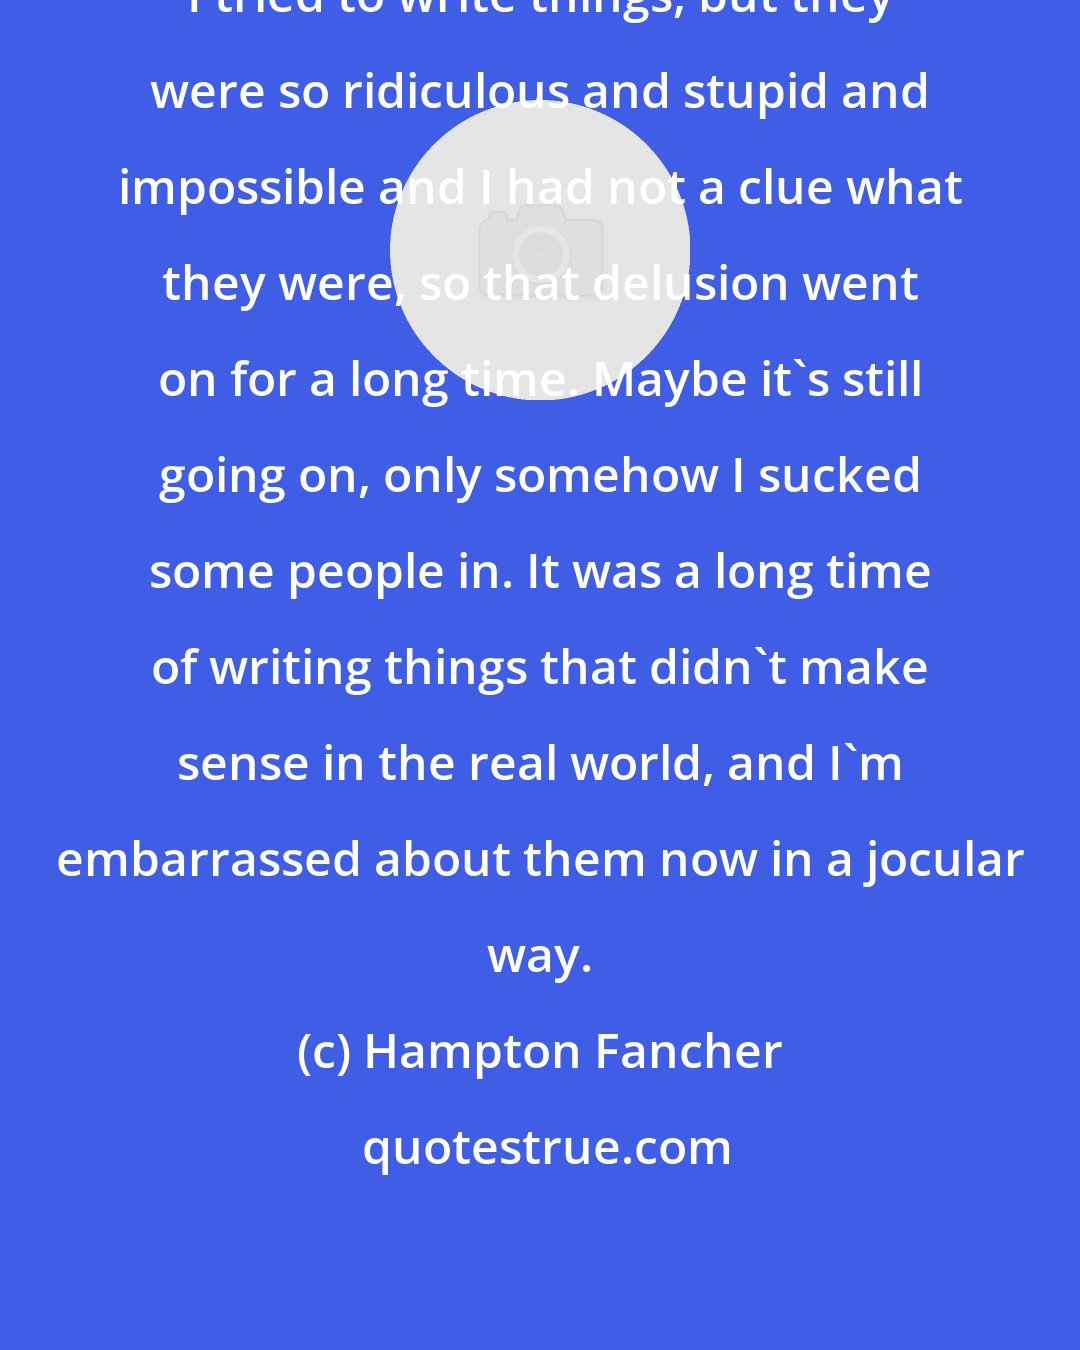 Hampton Fancher: I tried to write things, but they were so ridiculous and stupid and impossible and I had not a clue what they were, so that delusion went on for a long time. Maybe it's still going on, only somehow I sucked some people in. It was a long time of writing things that didn't make sense in the real world, and I'm embarrassed about them now in a jocular way.